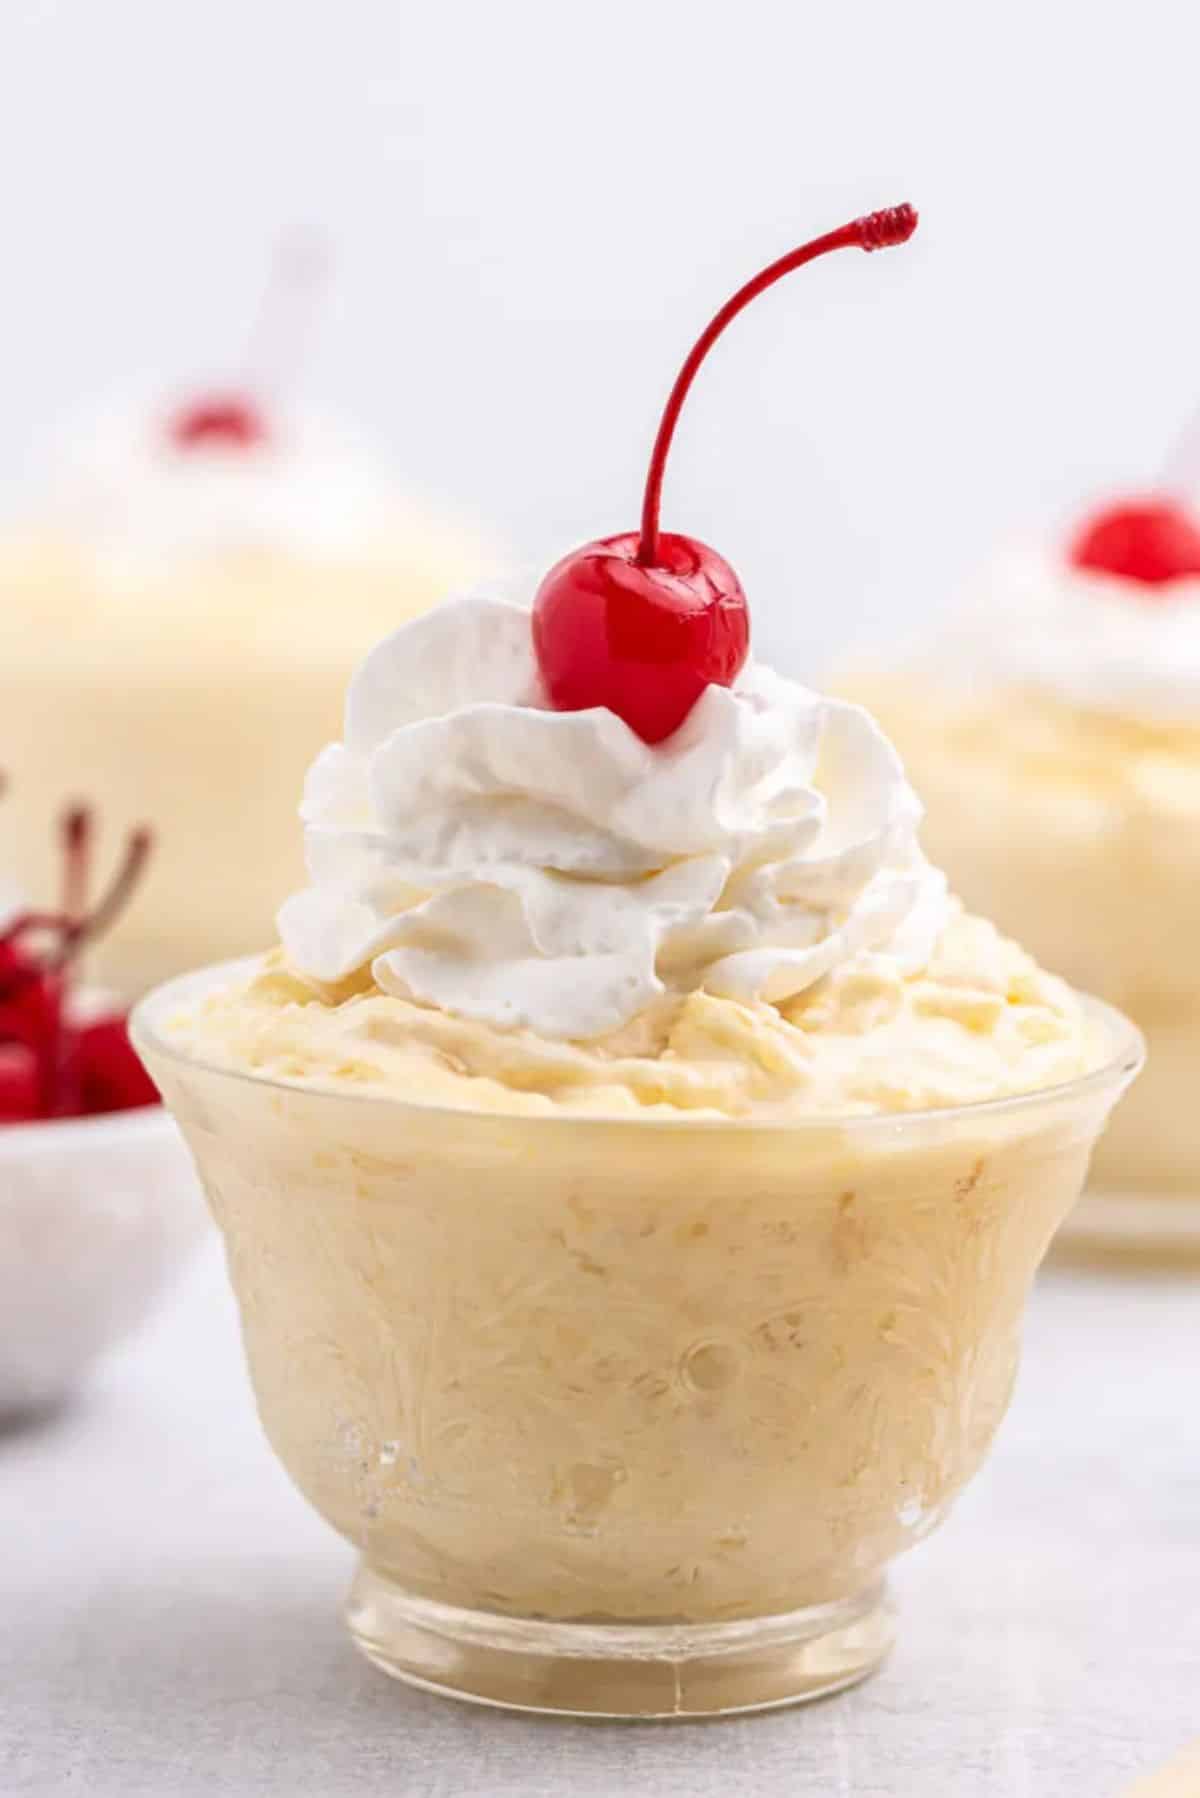 Creamy pineapple parfait garnished with cherry in a glass bowl.